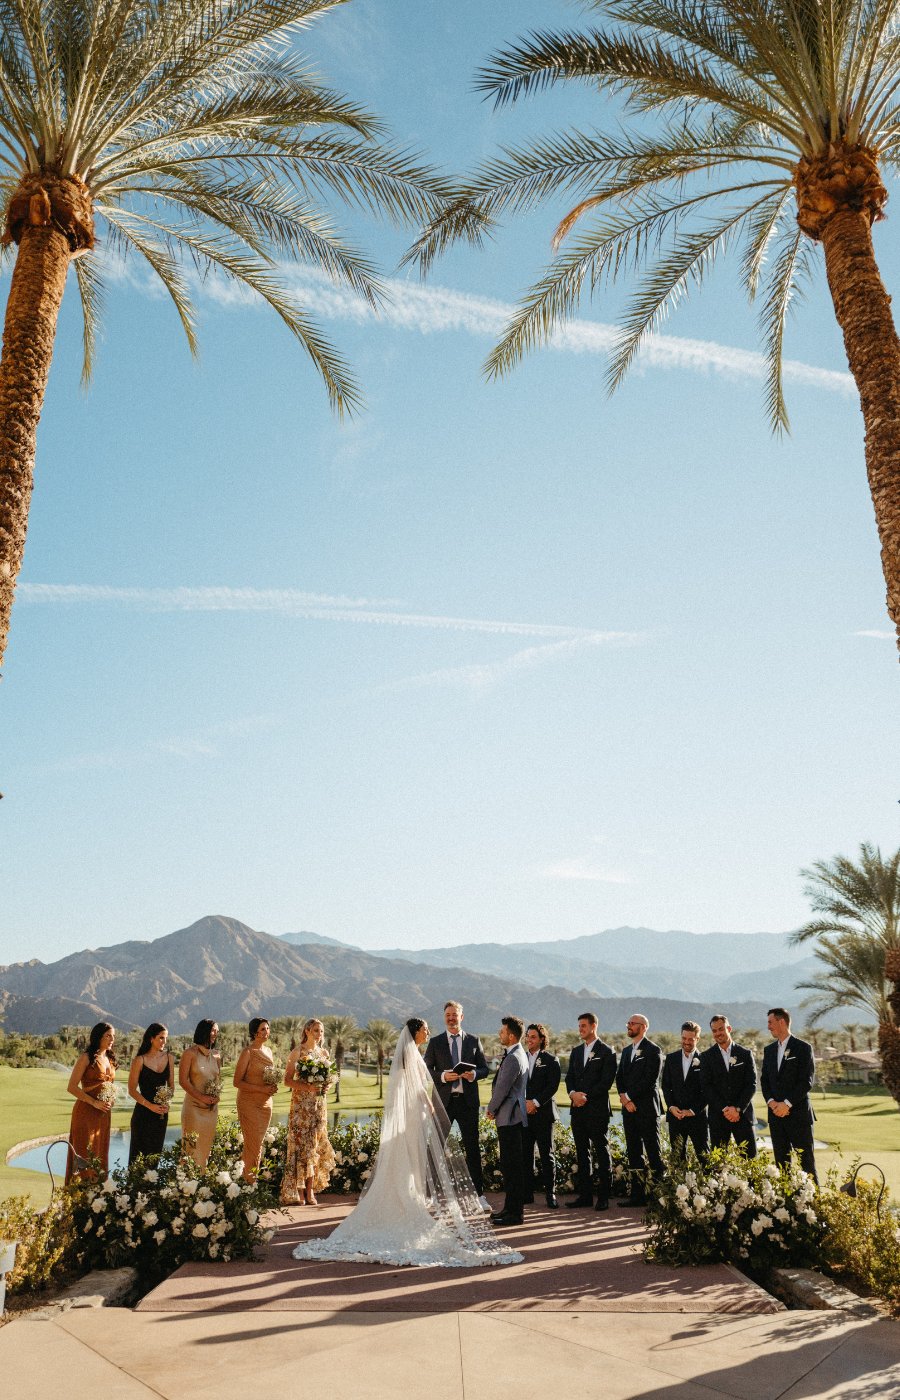 Outdoor wedding ceremony between two palm trees in Palm Desert, California